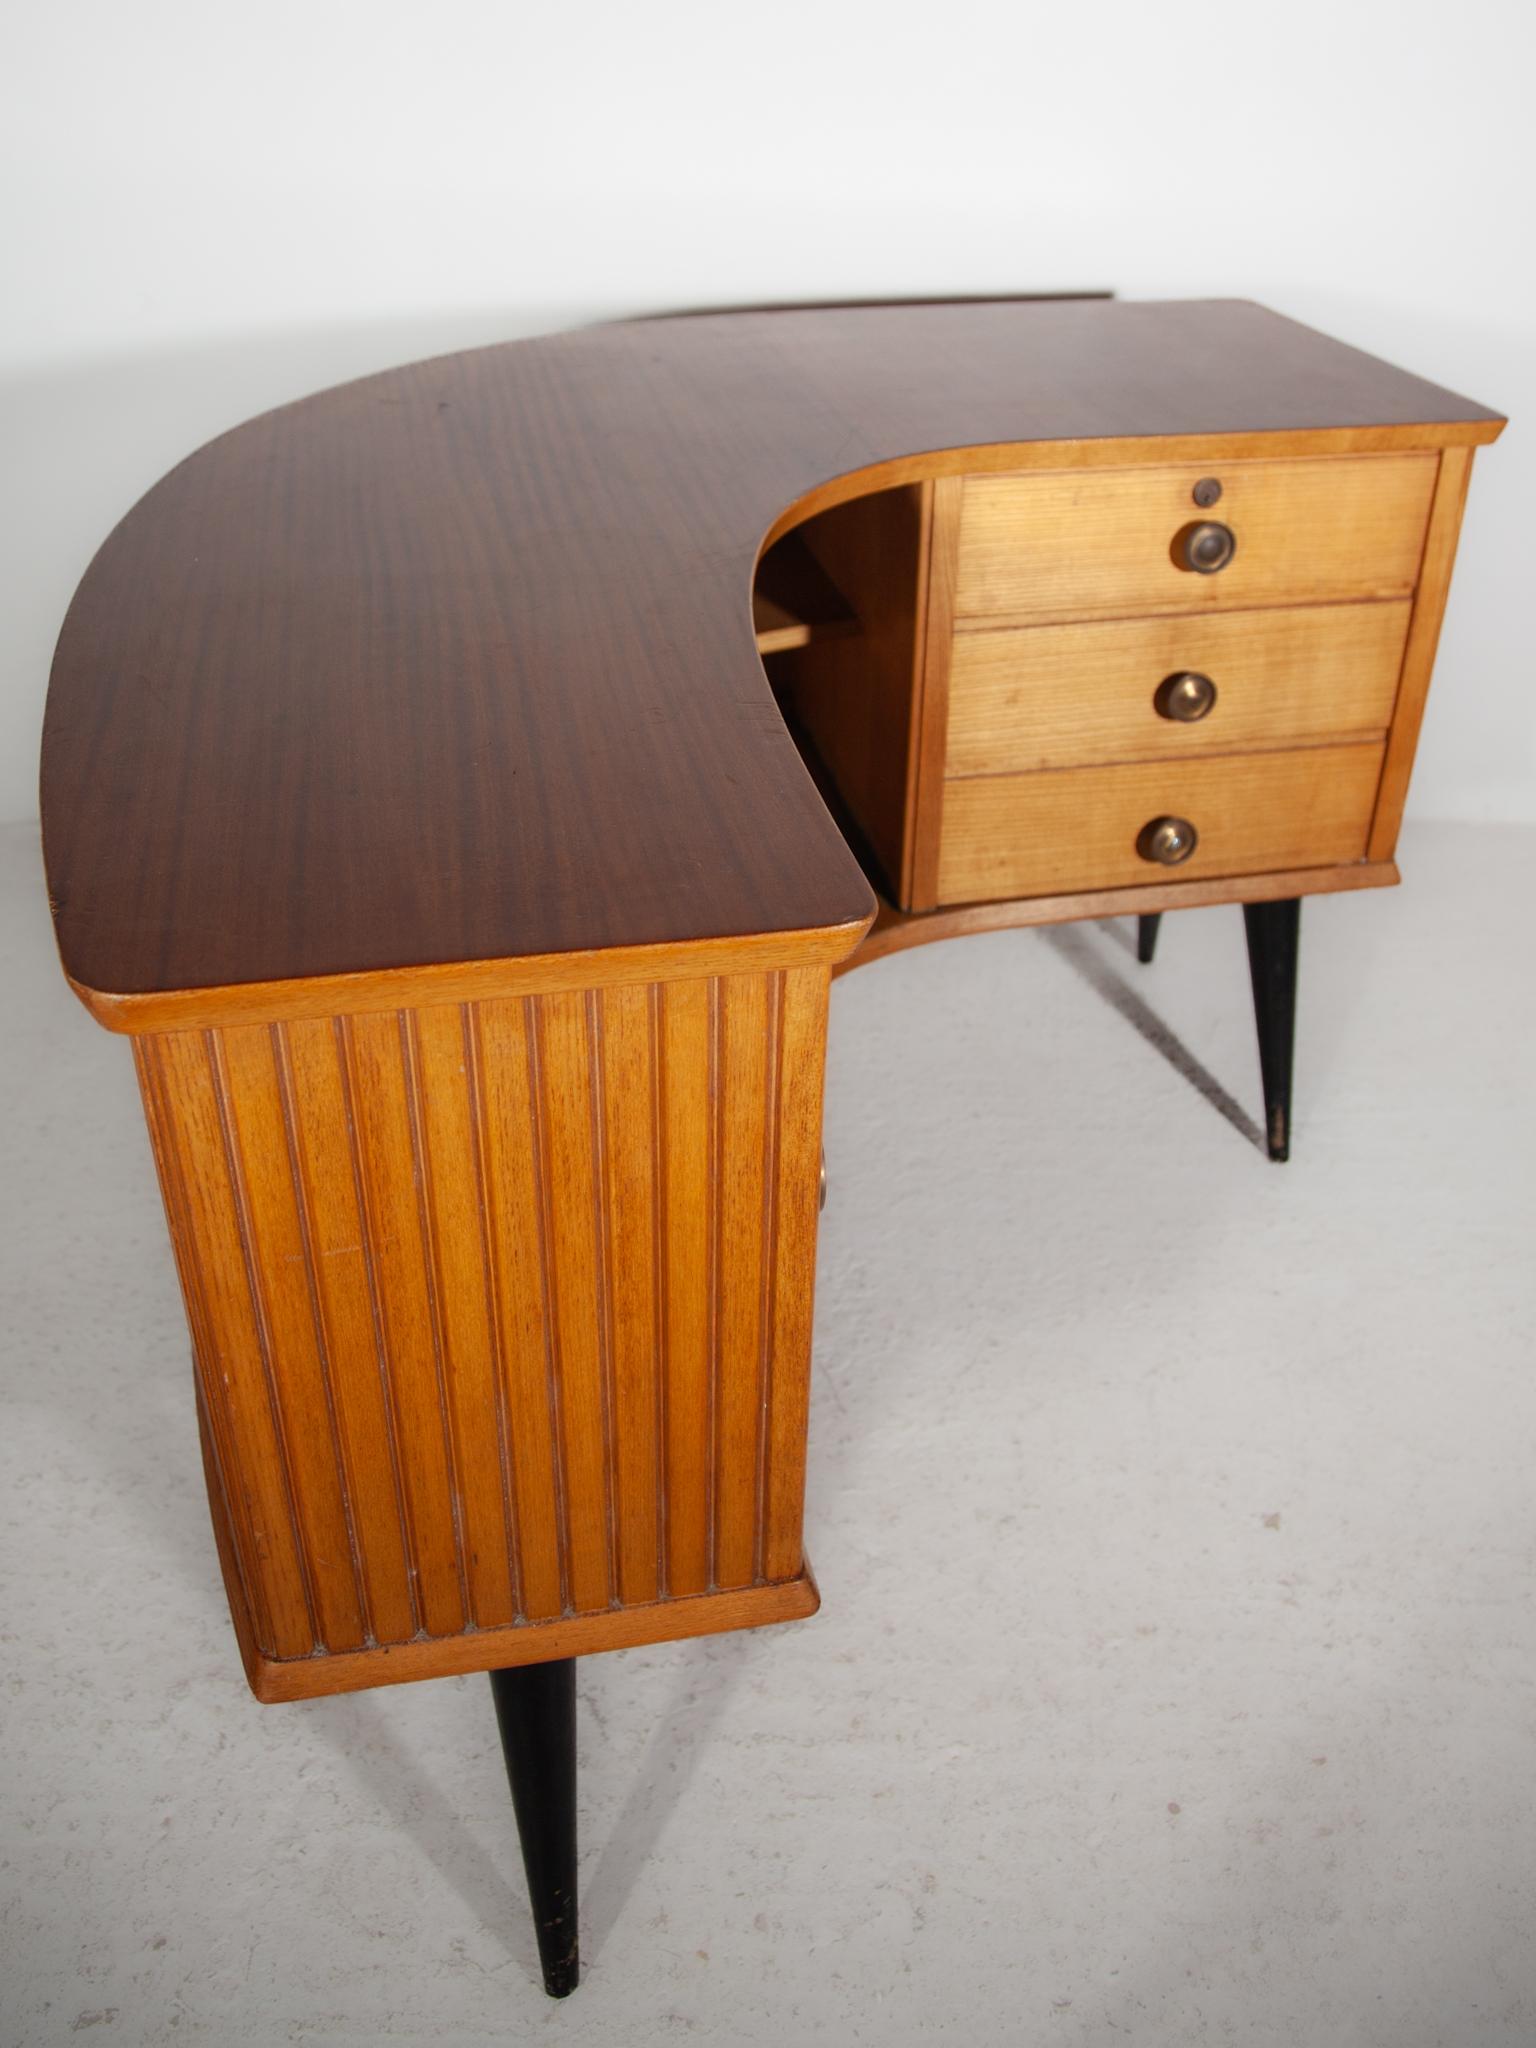 Boomerang Shaped Desk, Shop Counter, 1950s by Alfred Hendrickx For Sale 6